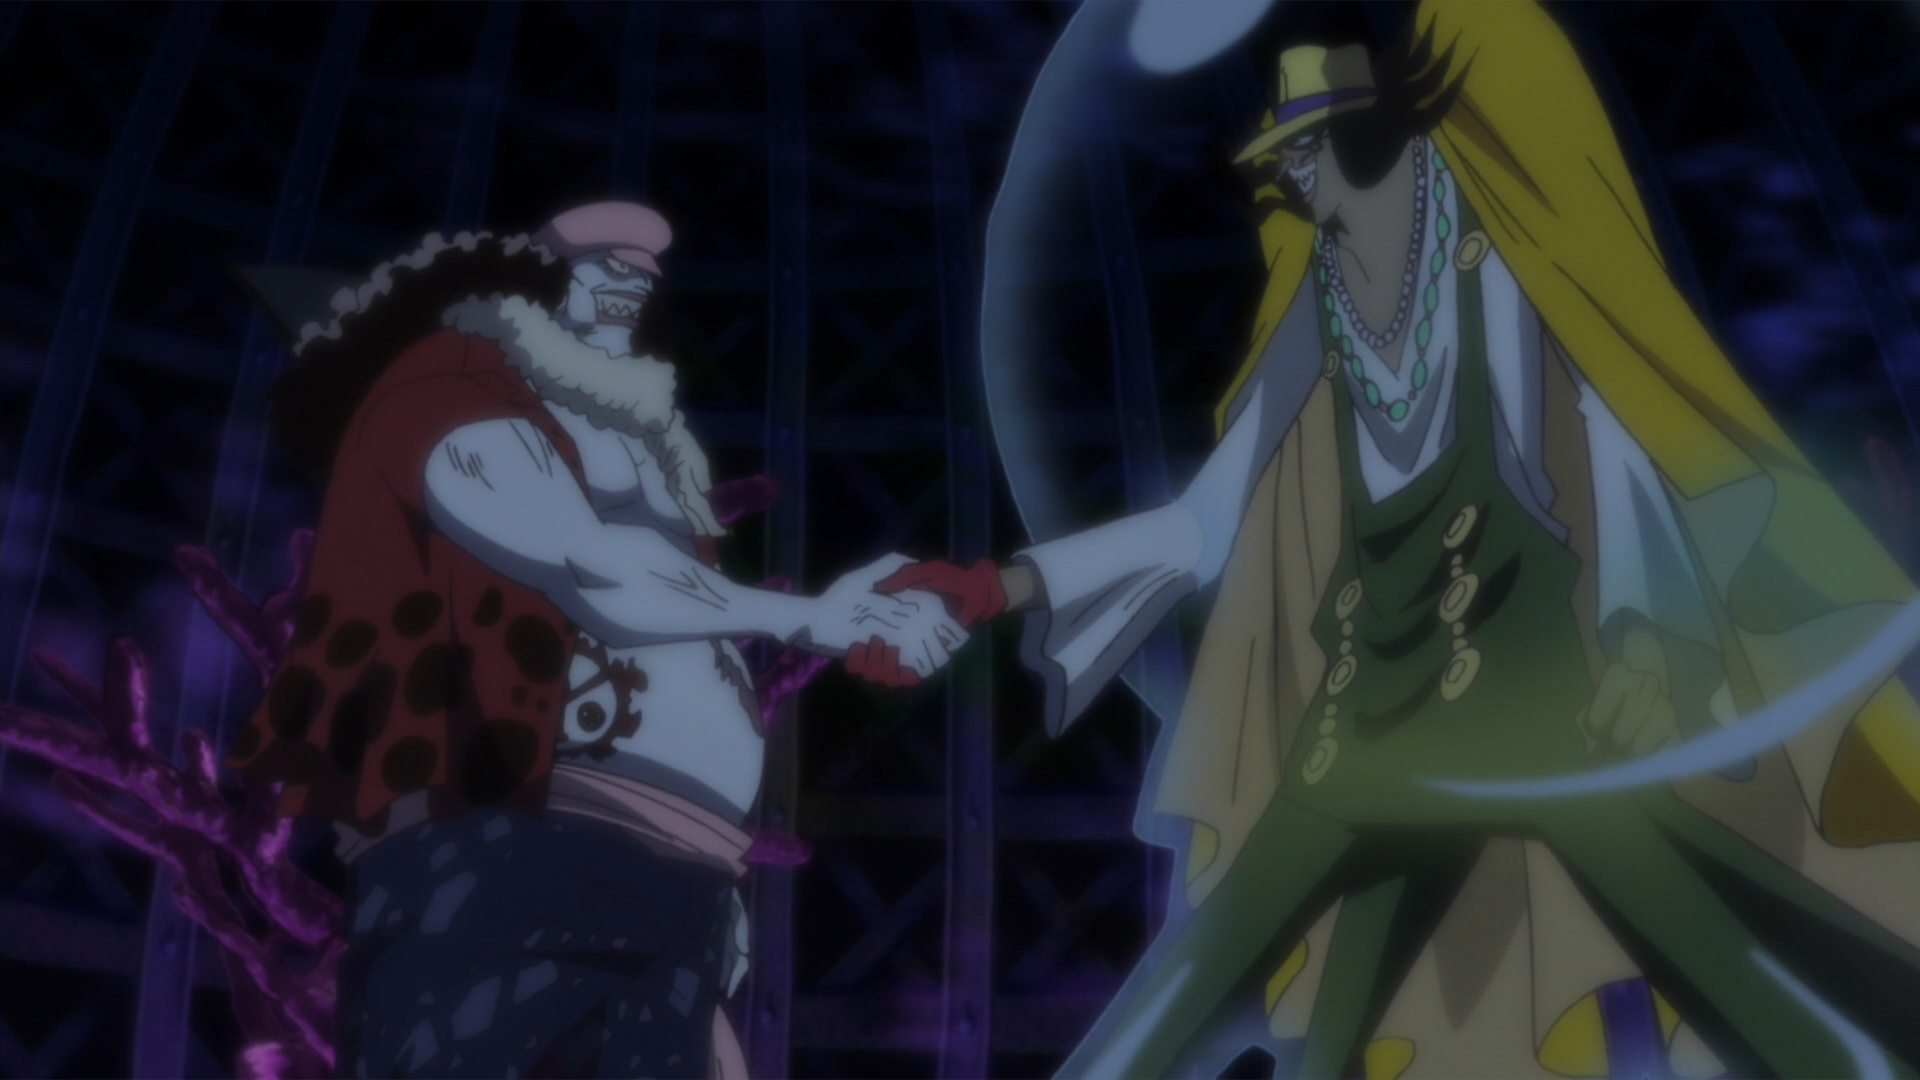 One Piece - Don't underestimate these young pirates! [via Episode 1017]